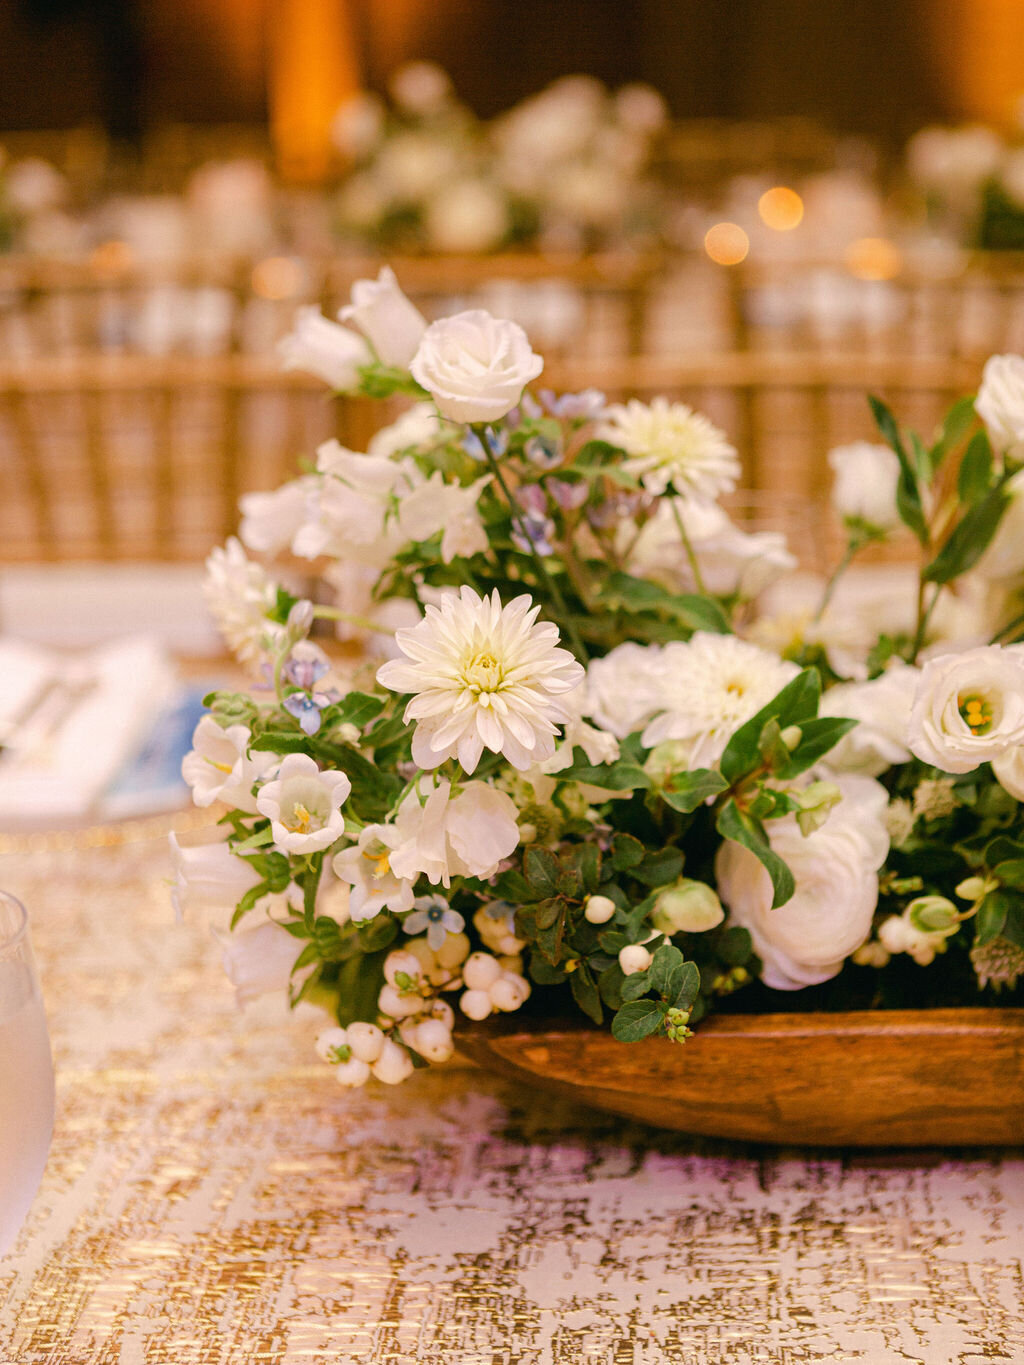 All white wedding flowers for a southern wedding in Georgia